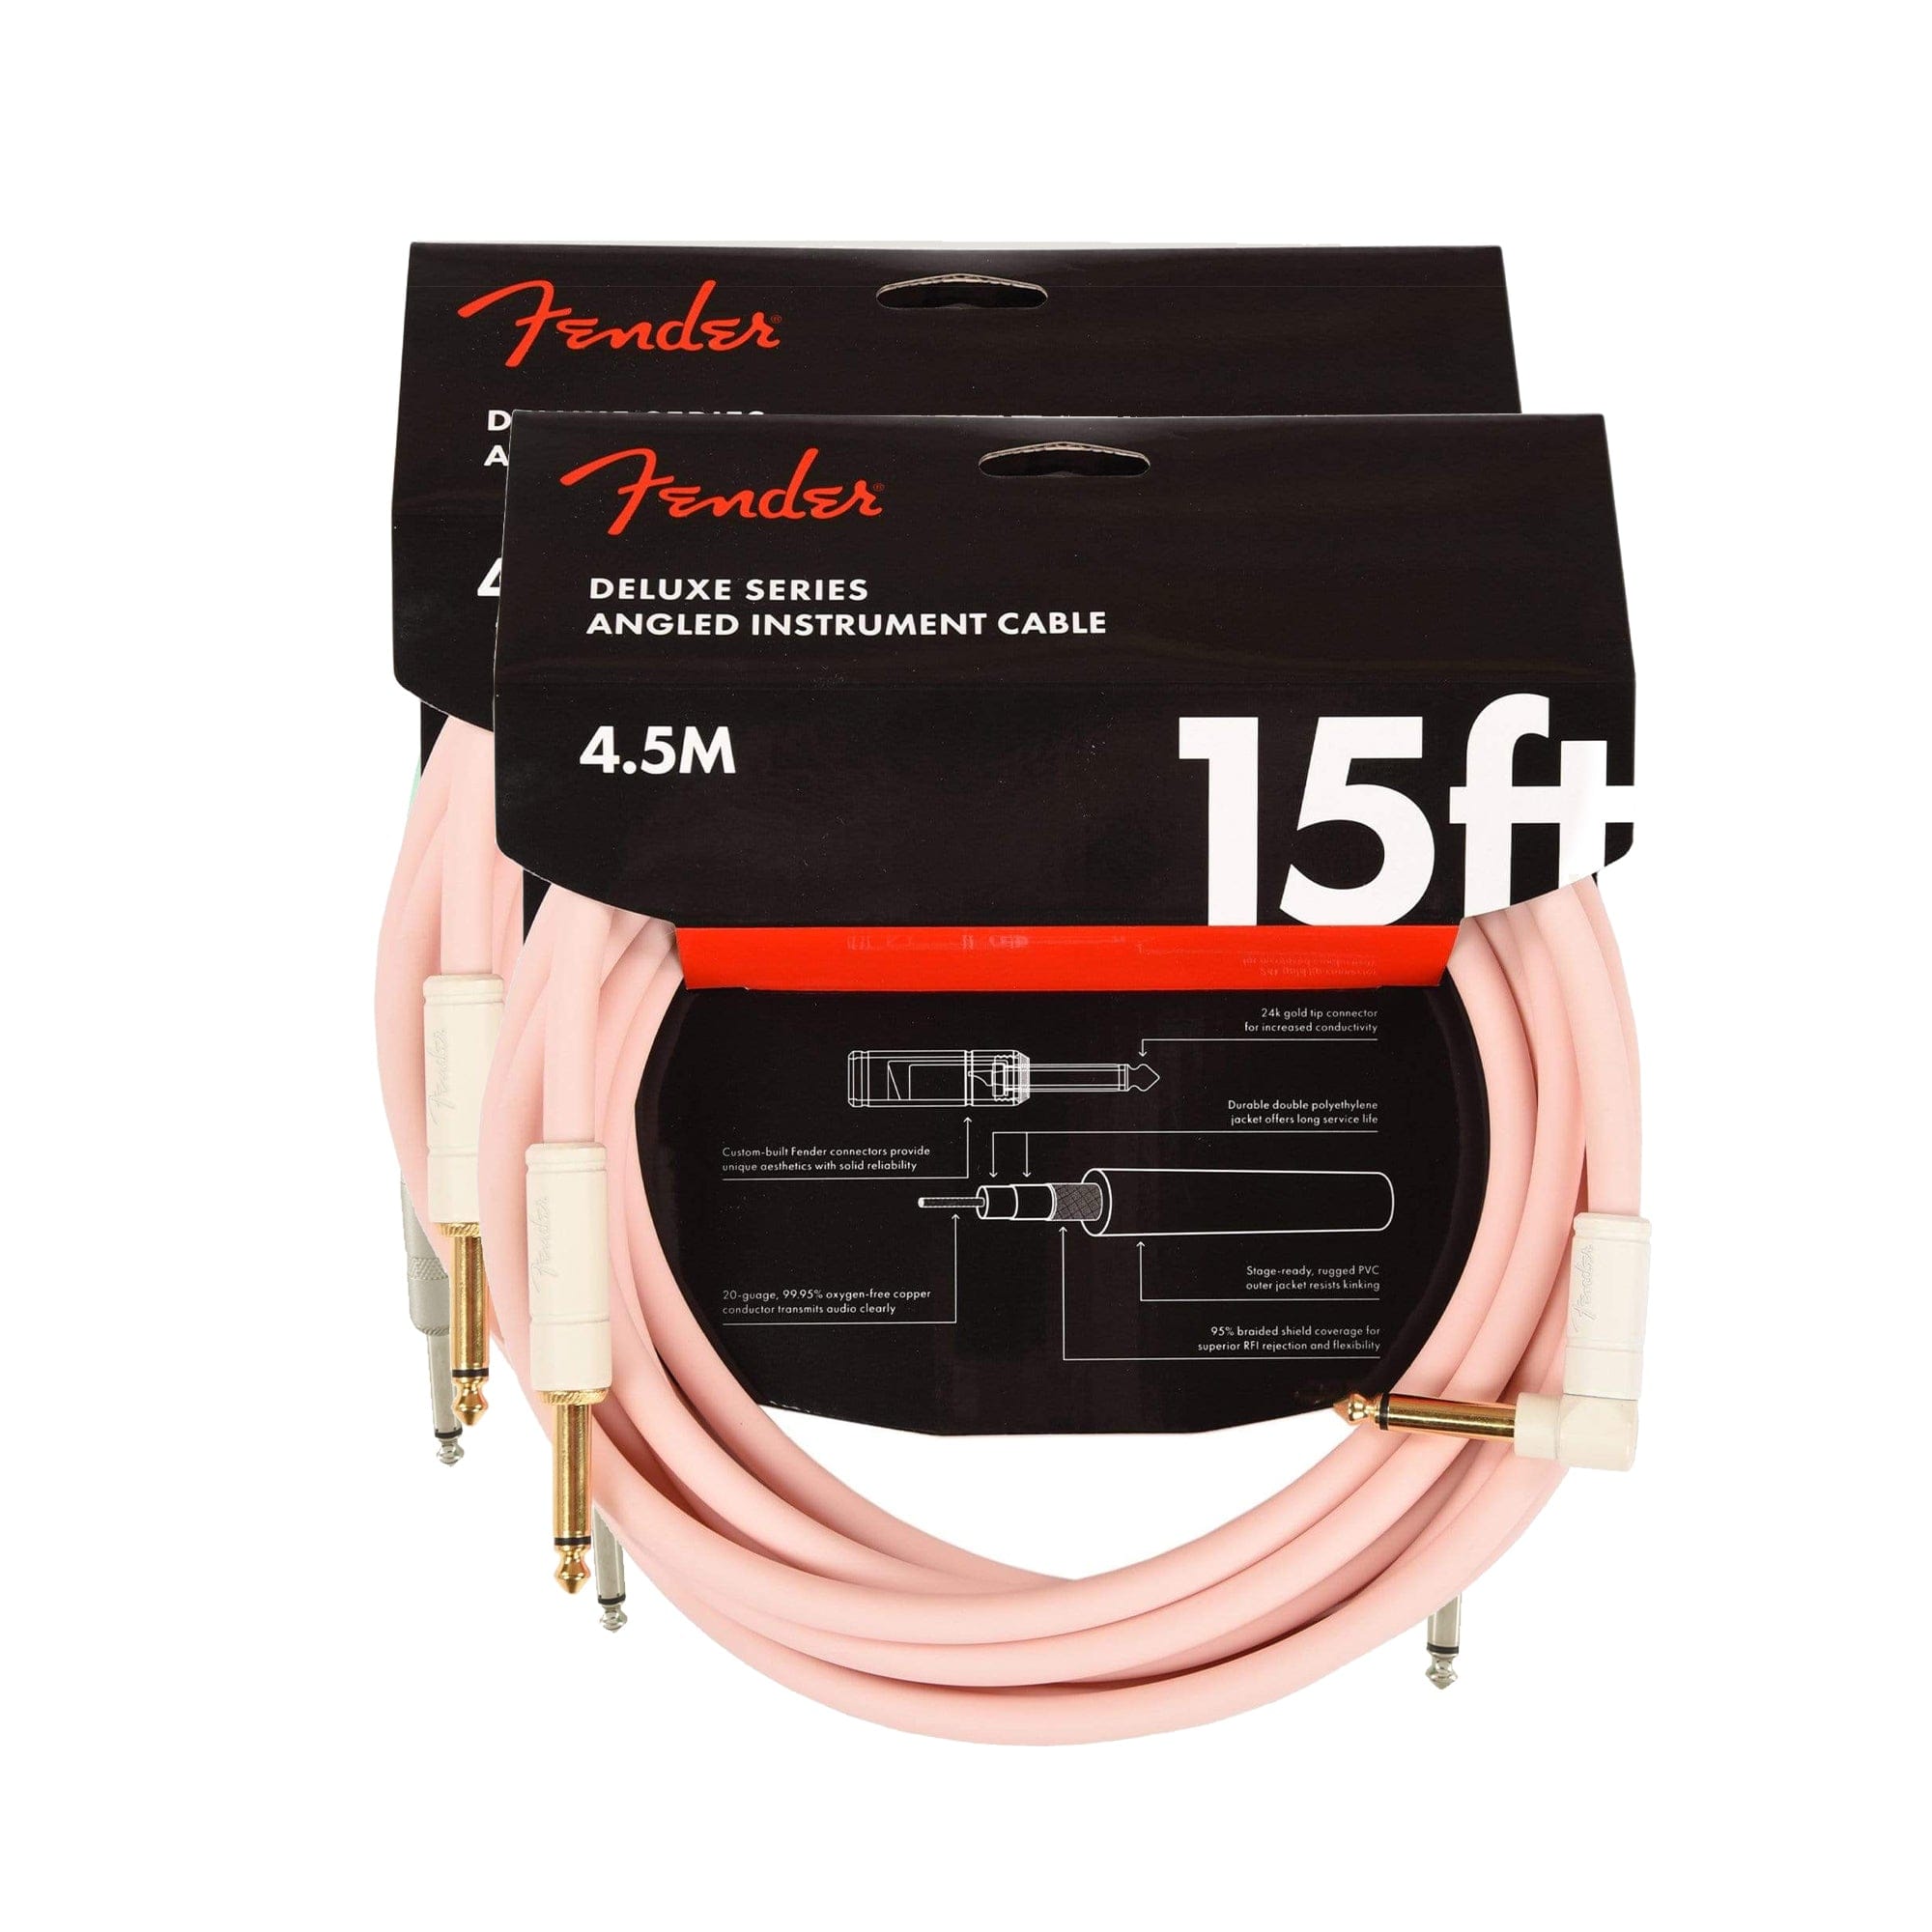 Fender Deluxe Instrument Cable Shell Pink 15' Angle-Straight (CME Exclusive) 2 Pack Bundle Accessories / Cables